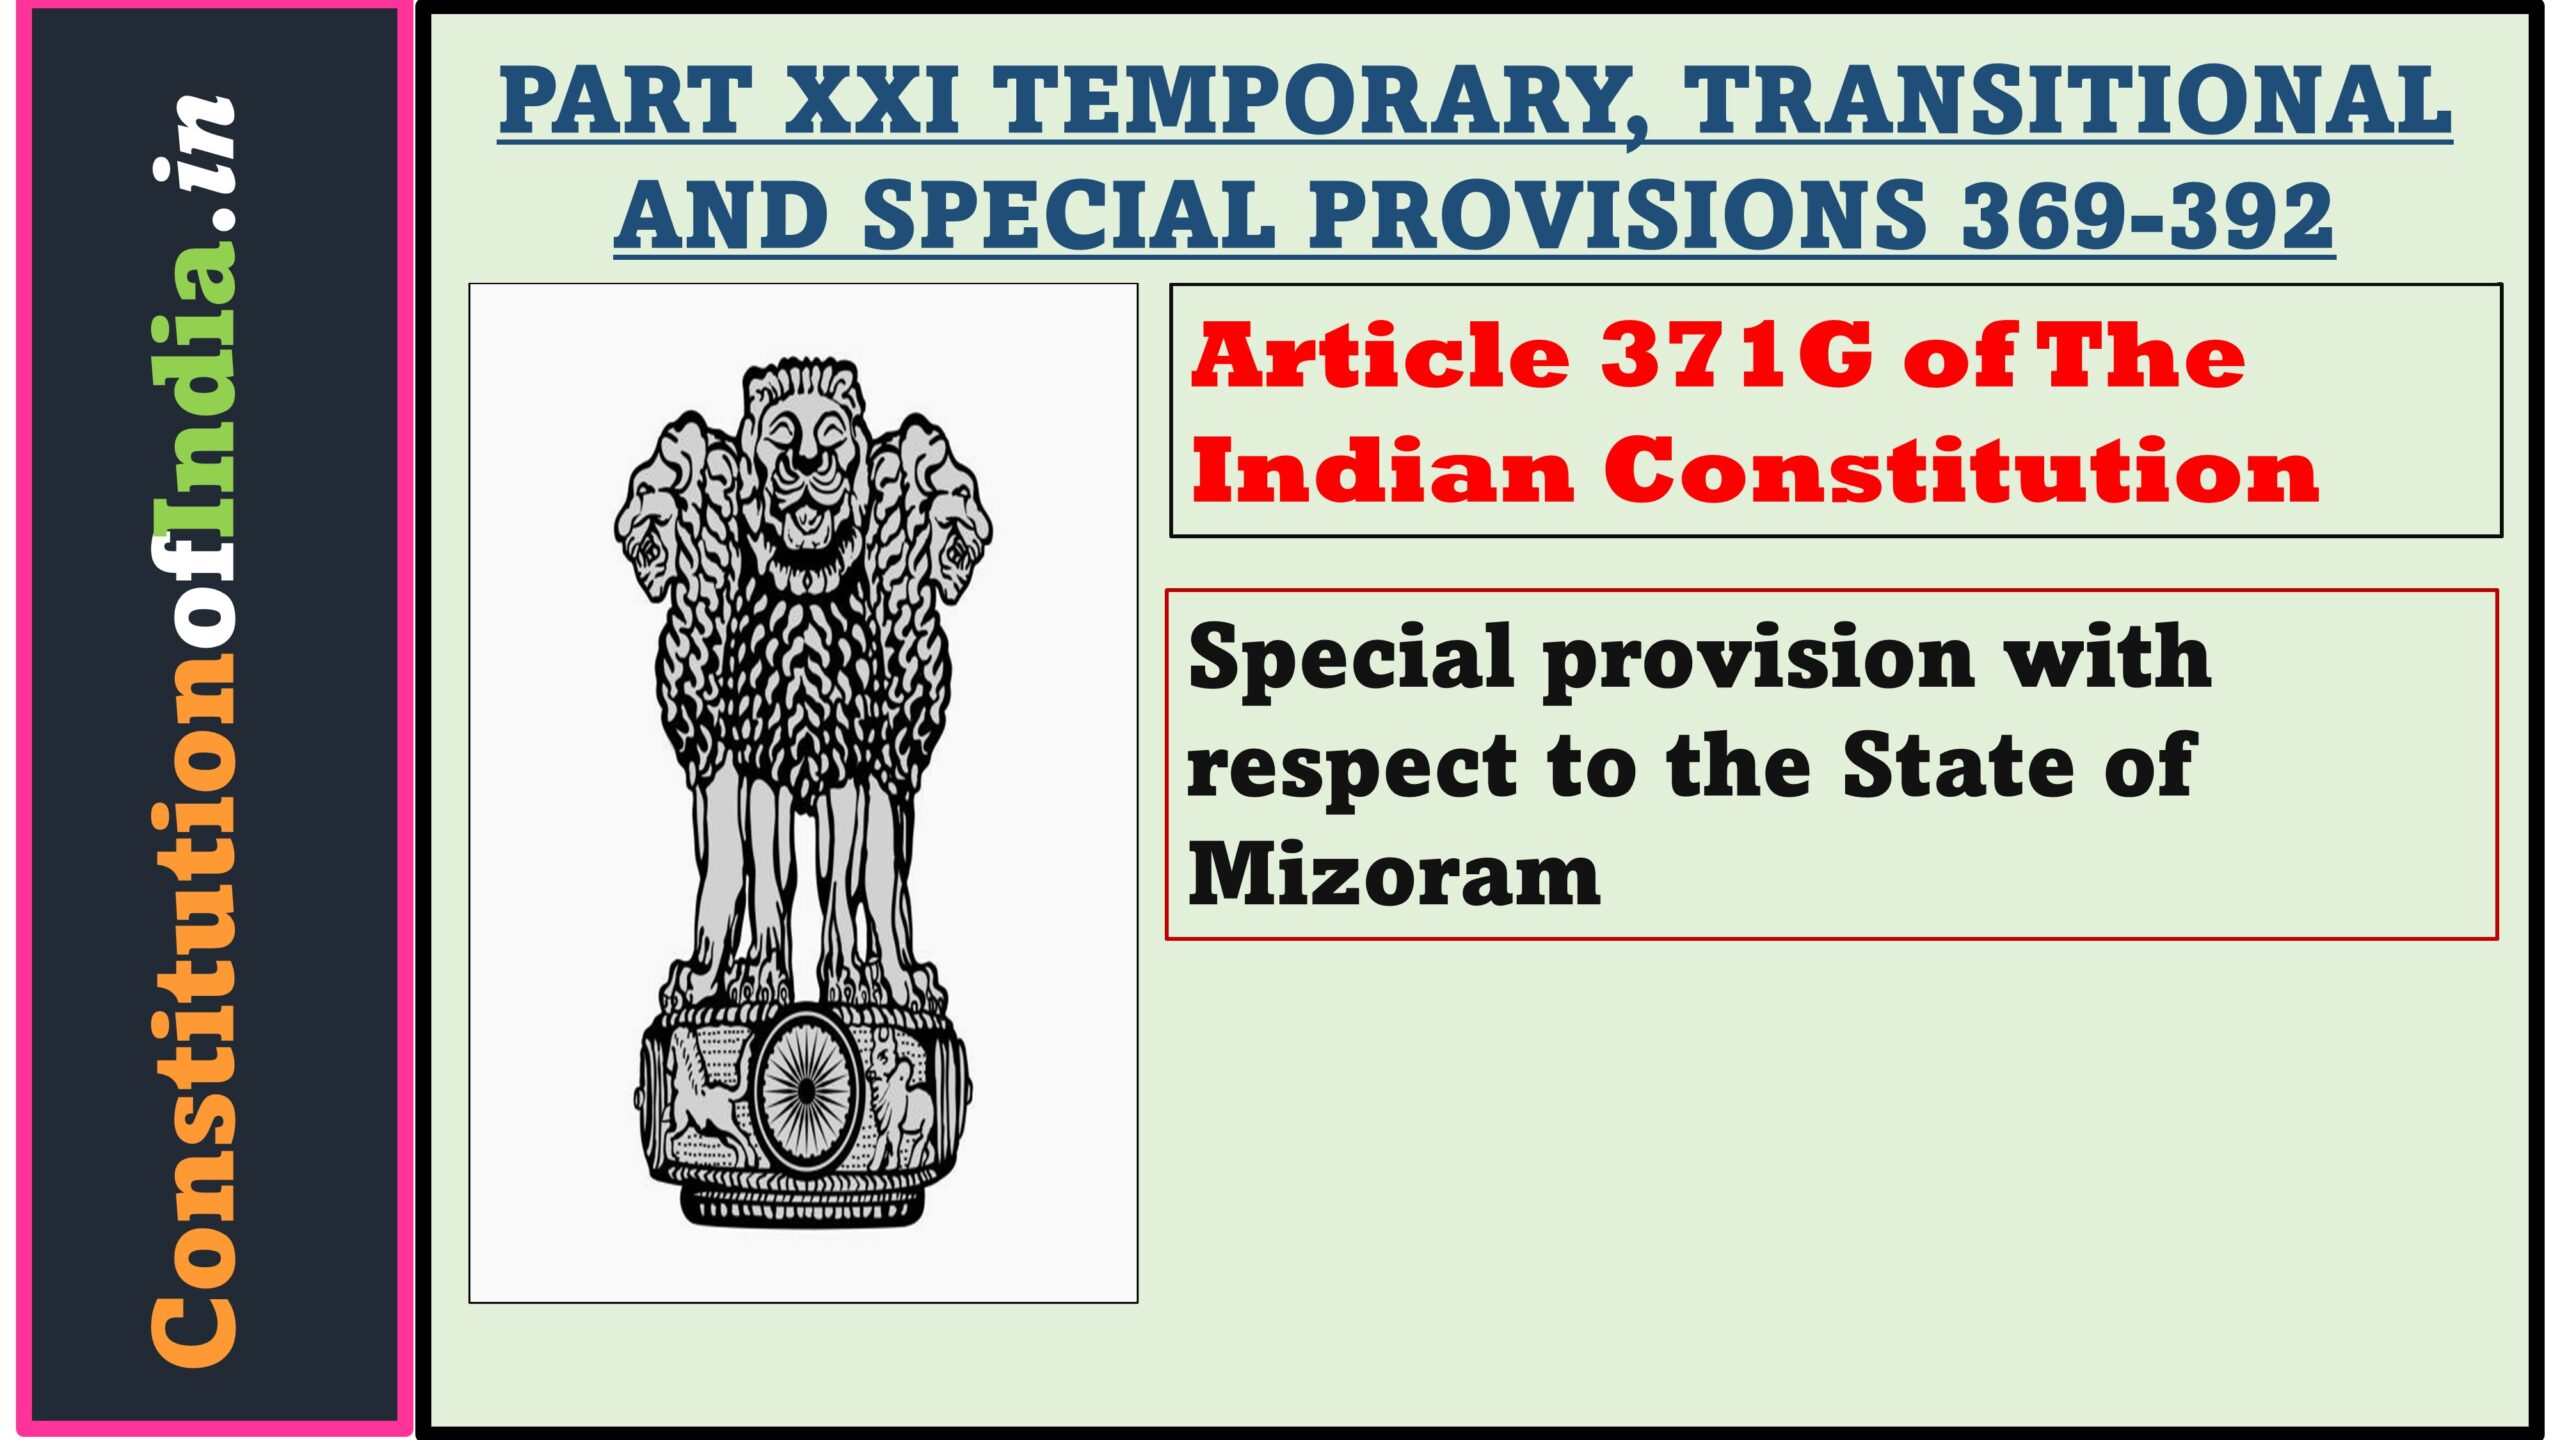 Article 371G of The Indian Constitution